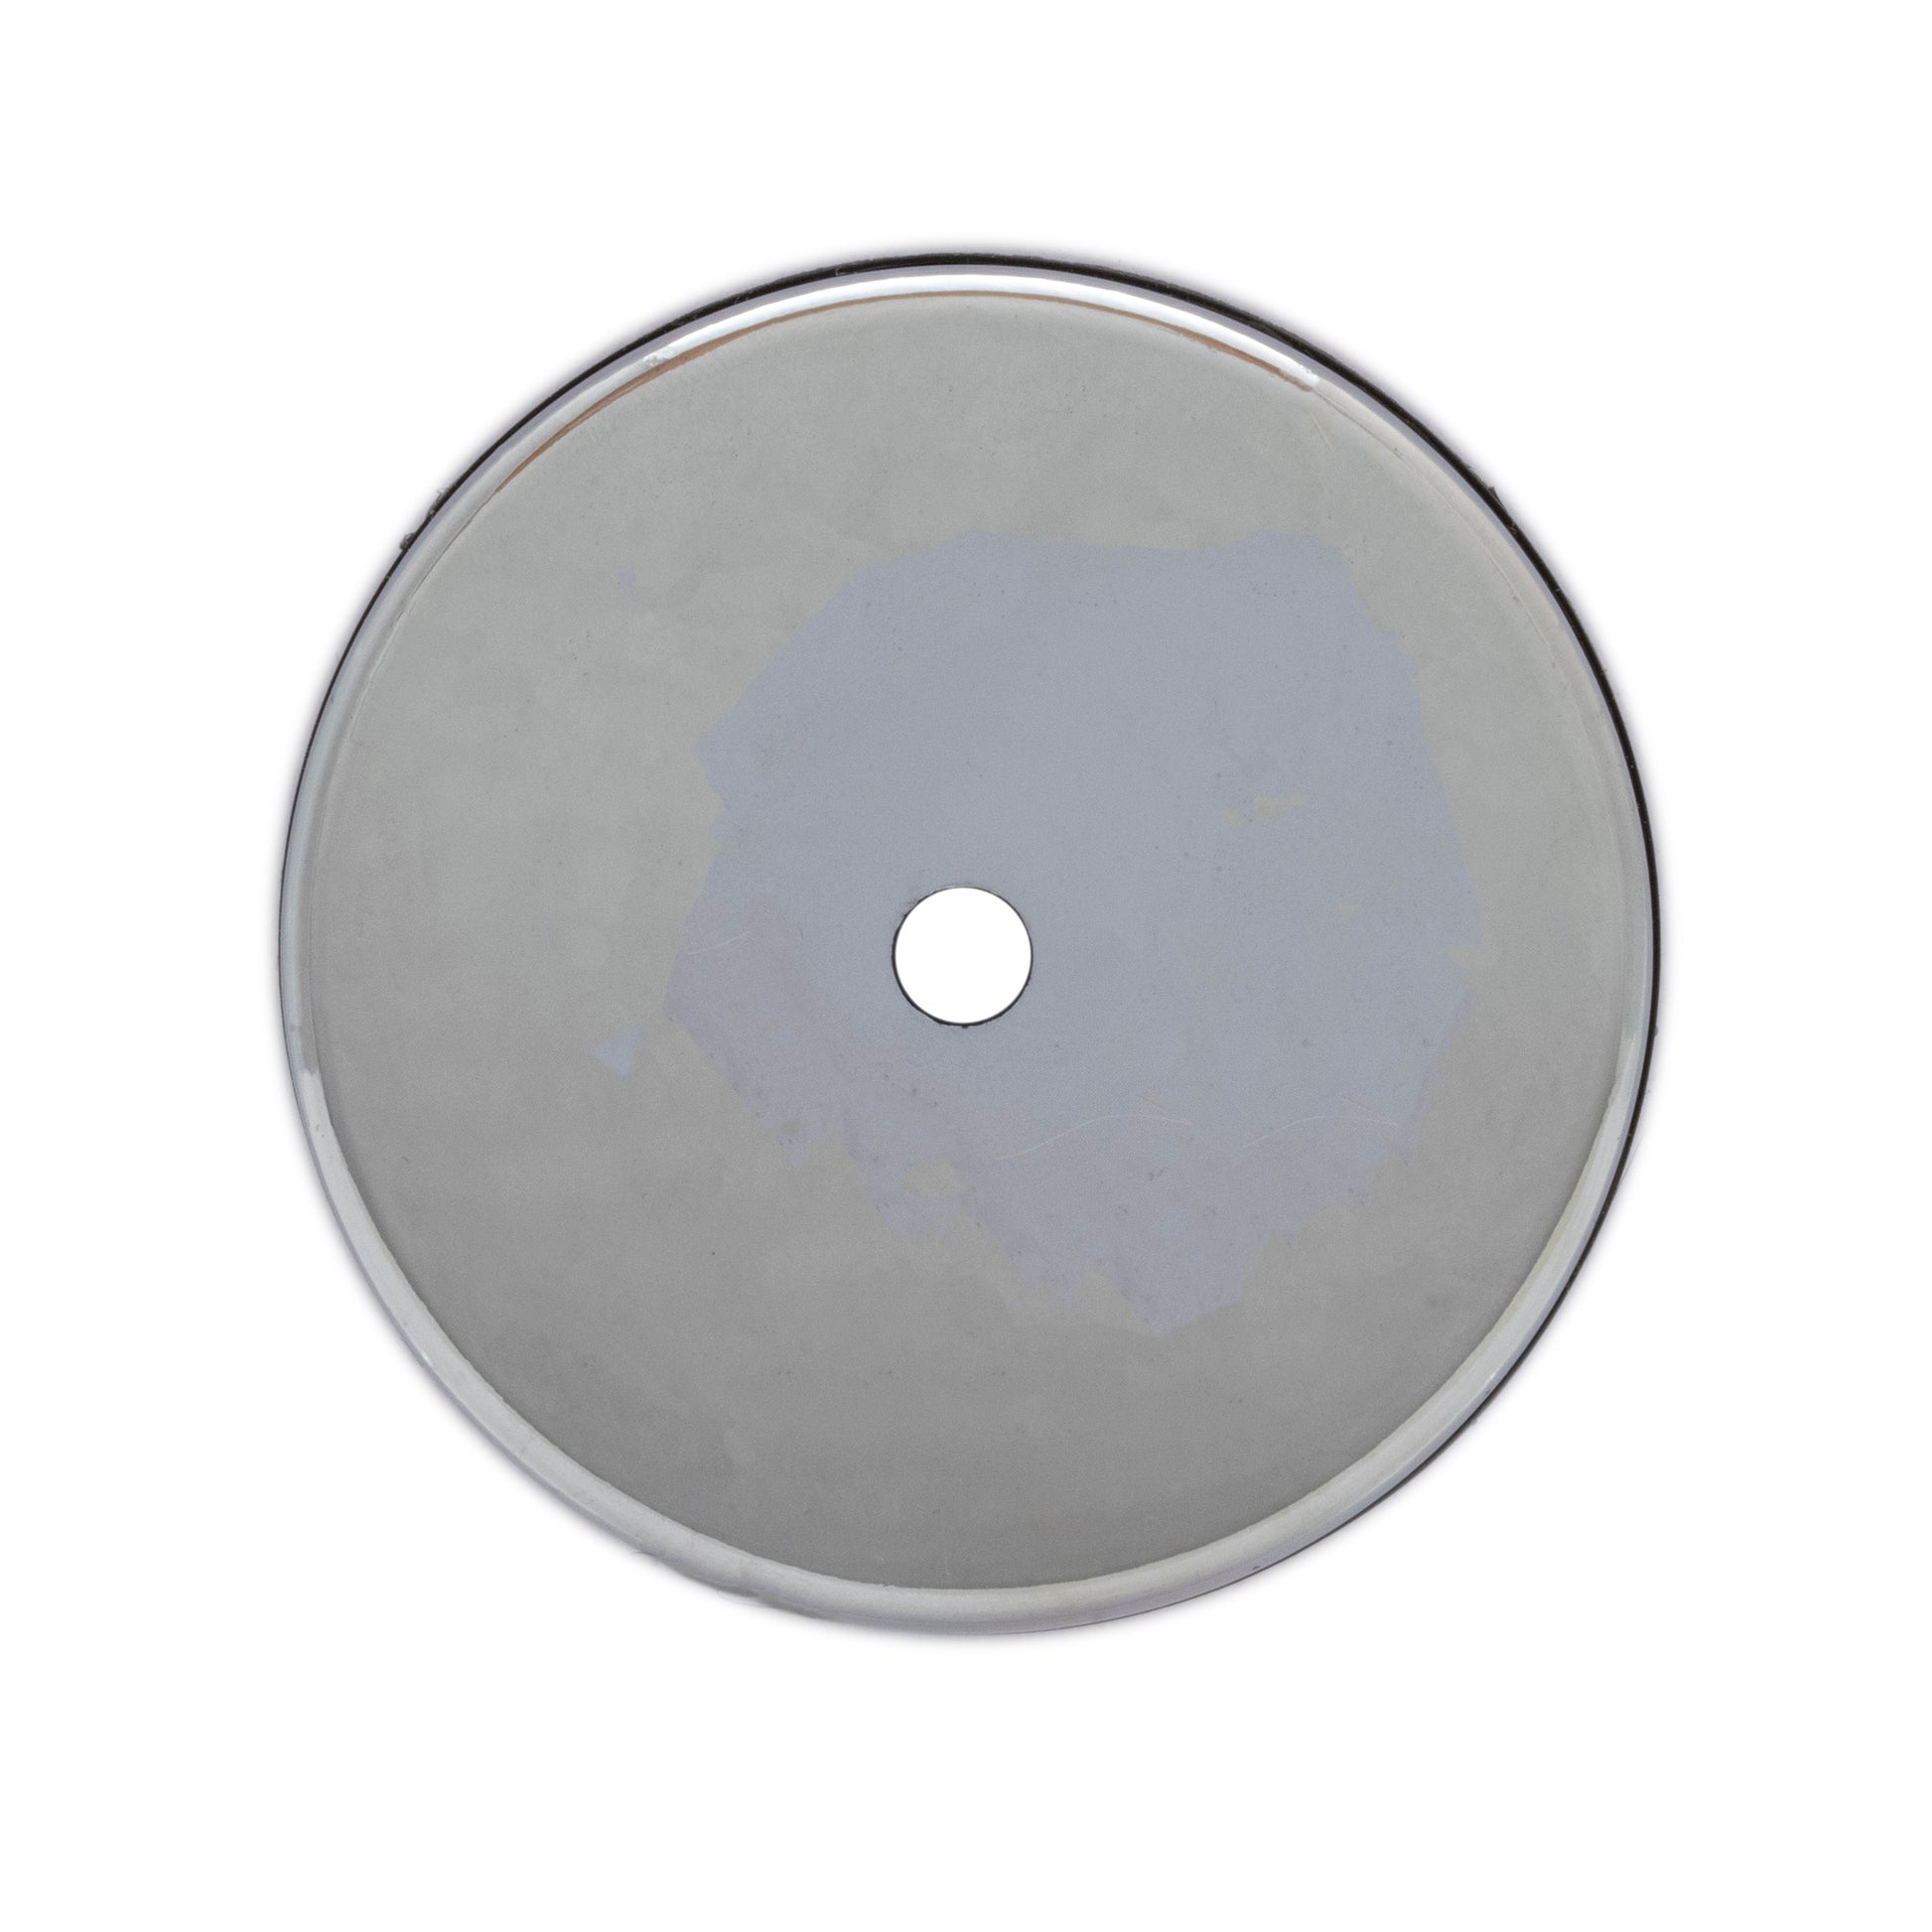 Load image into Gallery viewer, RB50PG-NEOBX NeoGrip™ Round Base Magnet - Bottom View